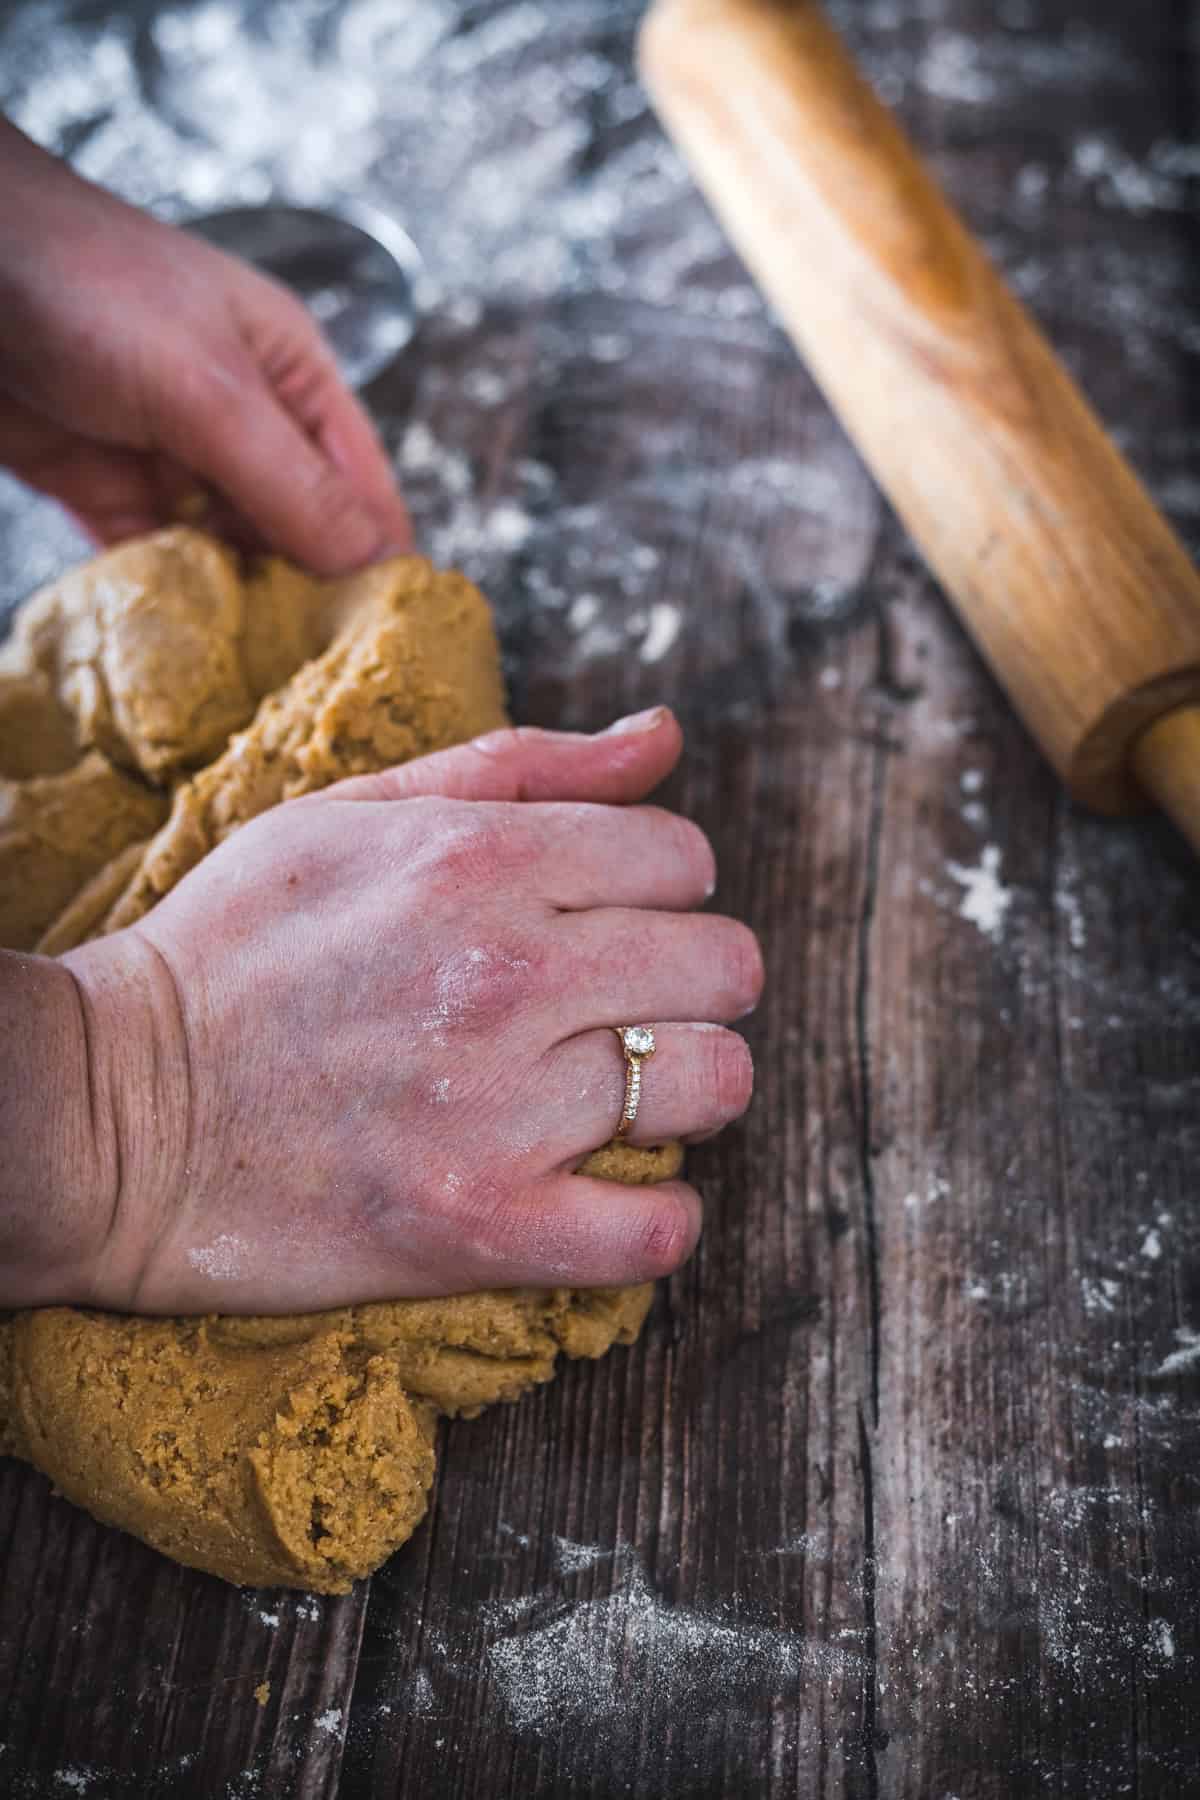 A person kneading dough on a wooden surface dusted with flour, with a rolling pin resting nearby, preparing to shape hamantaschen.